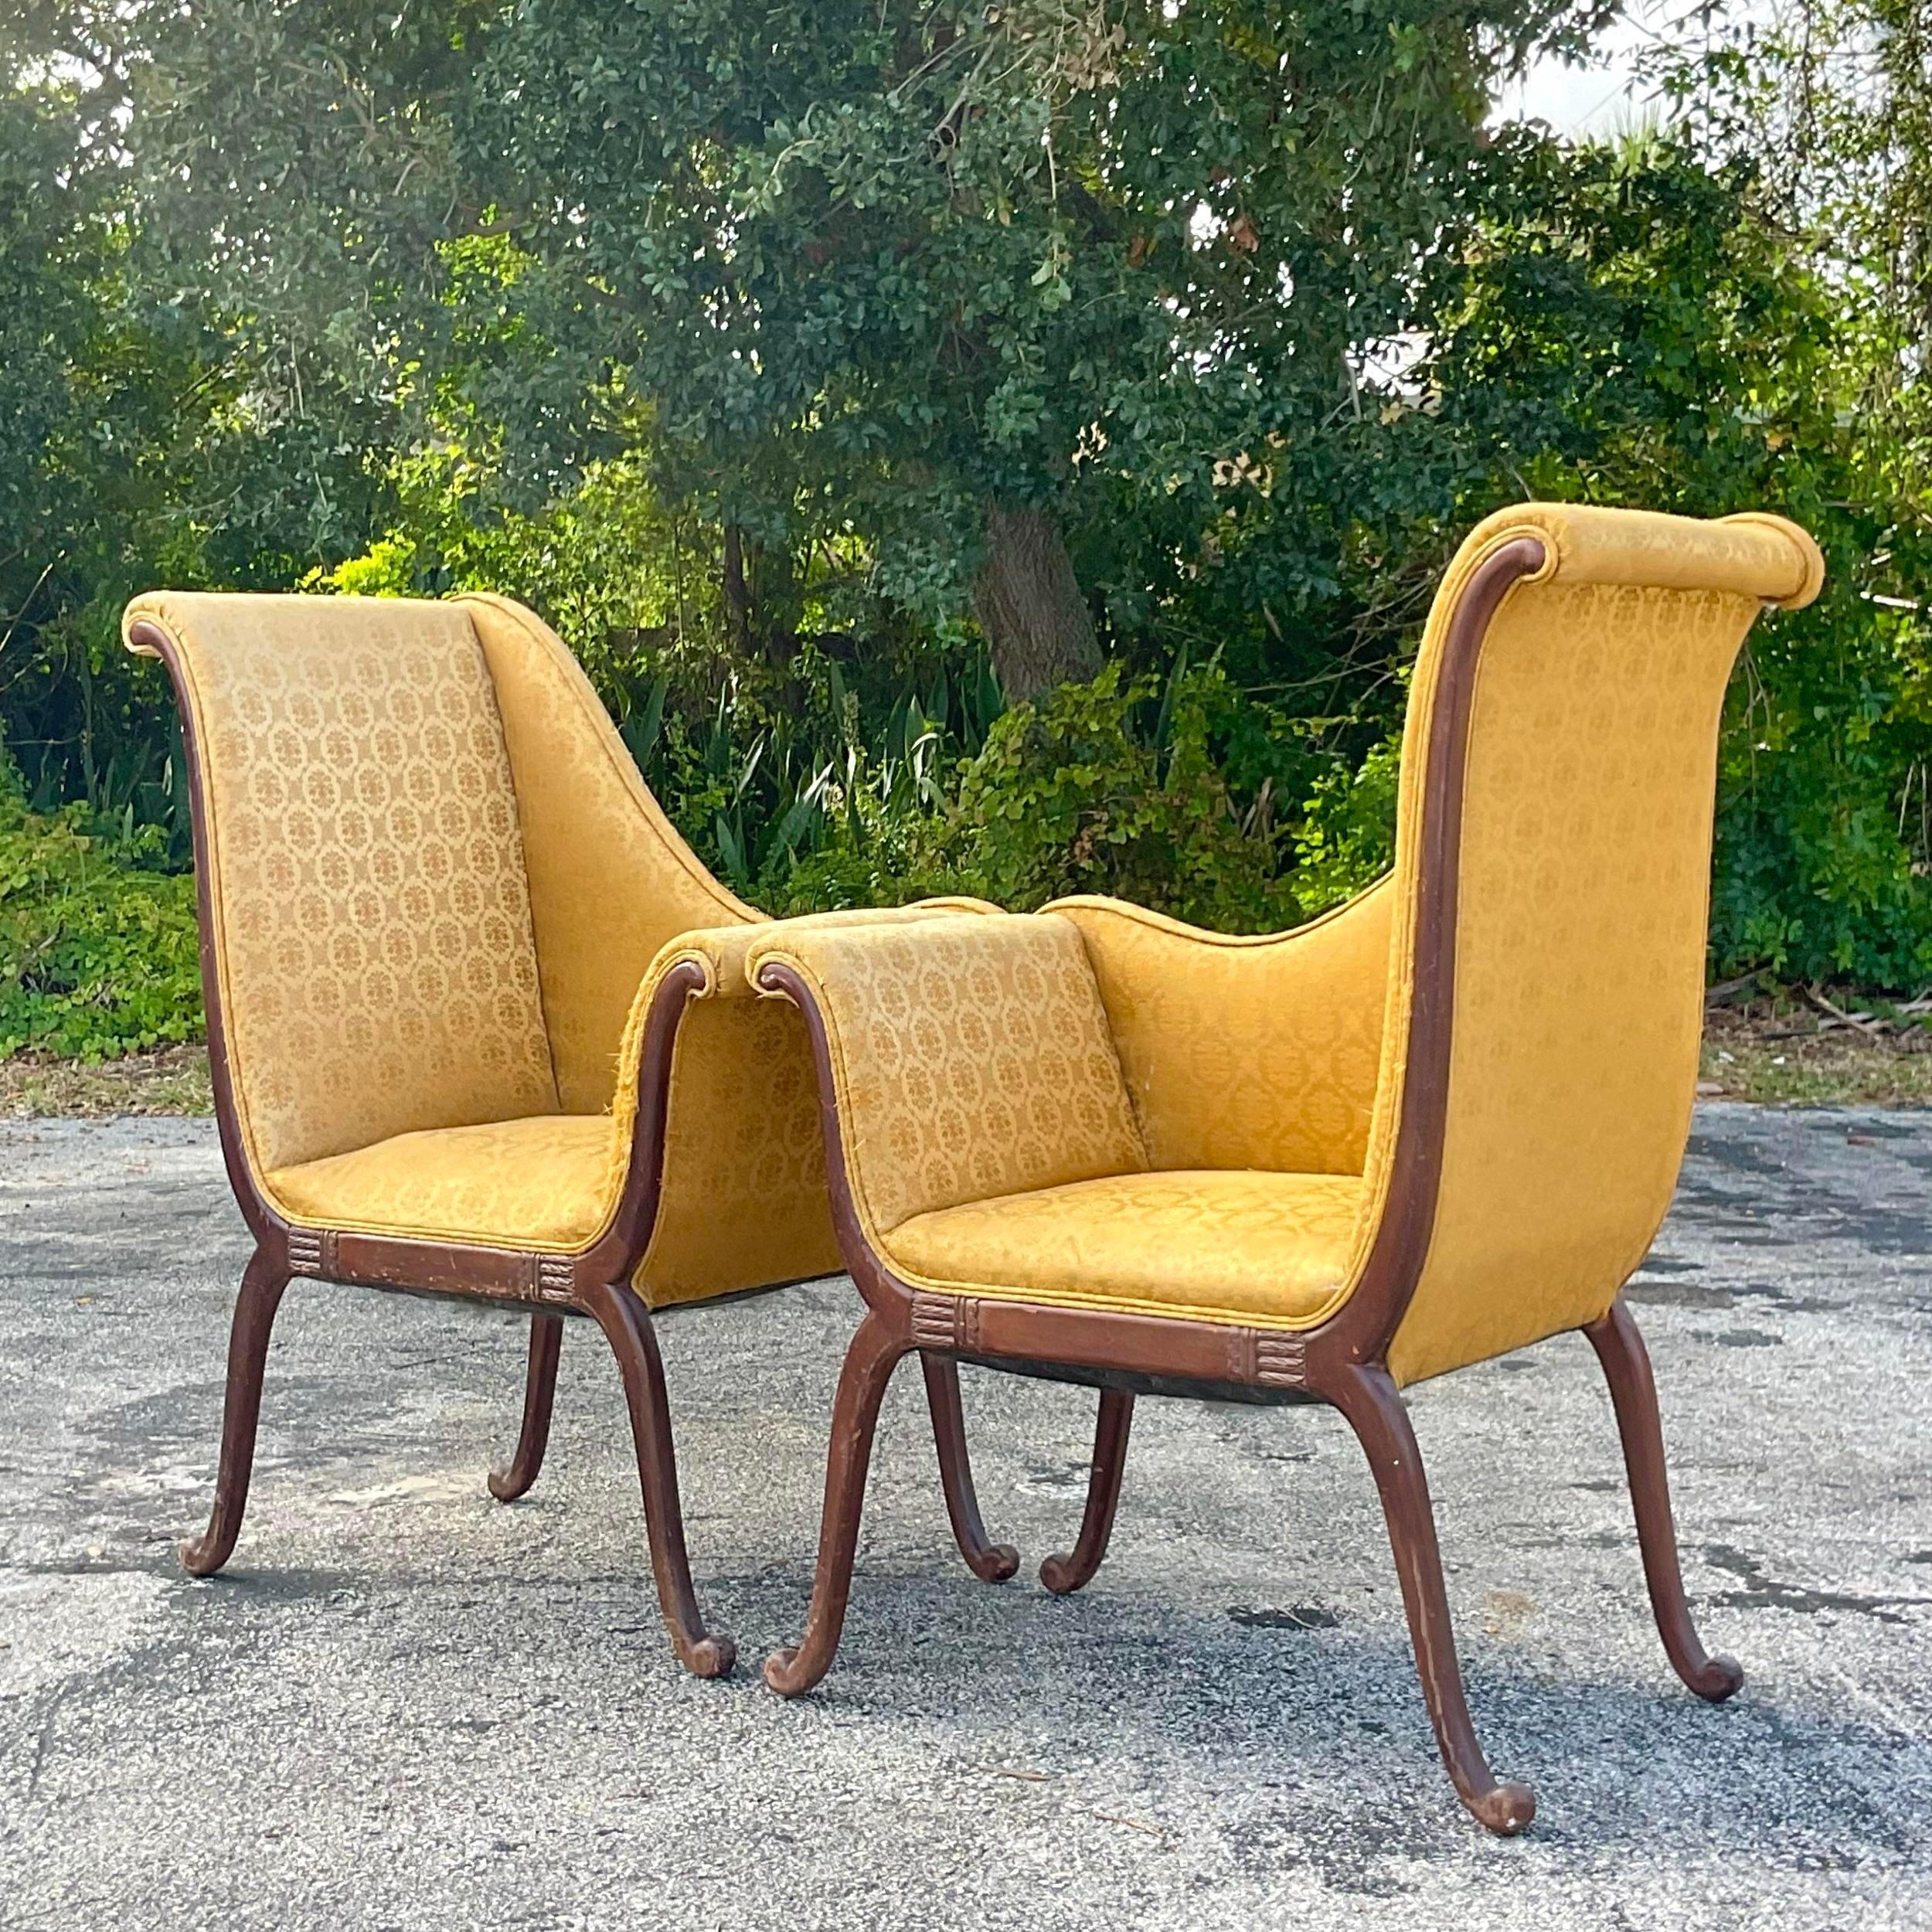 Upholstery Vintage Regency Parker Deux Chairs - a Pair For Sale